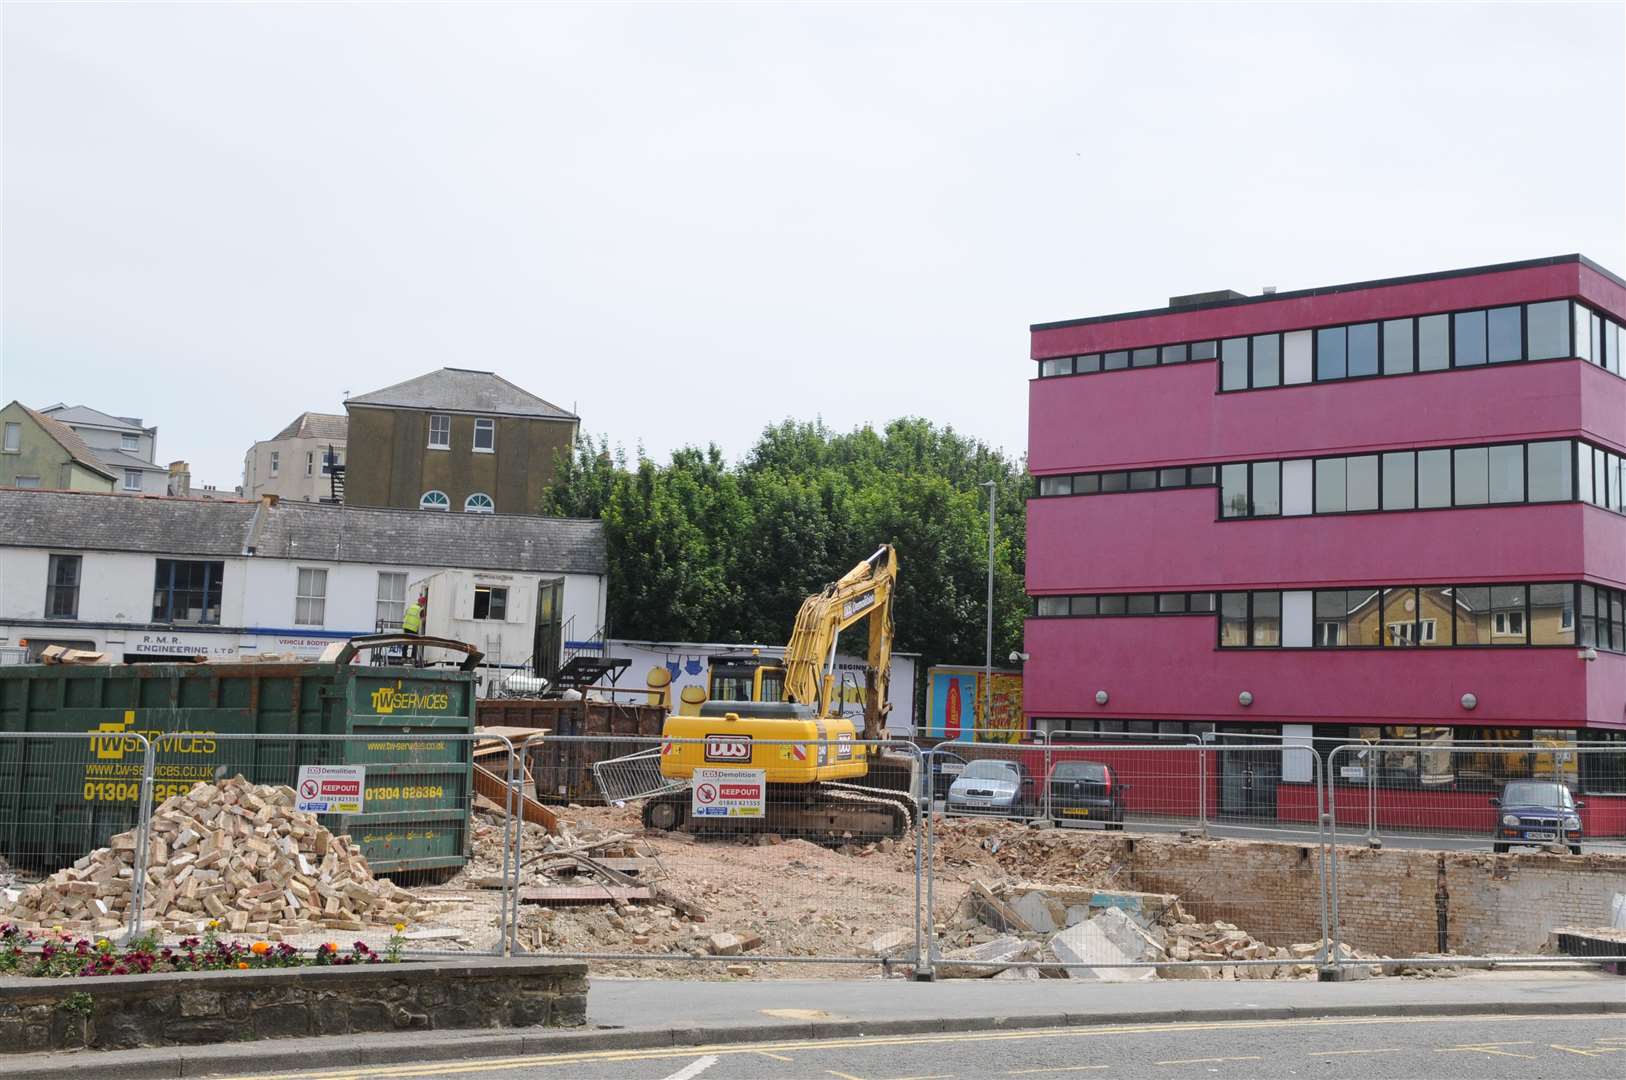 Demolition of the old bingo hall to make way for the proposed new multi-million pound skate park took place last summer